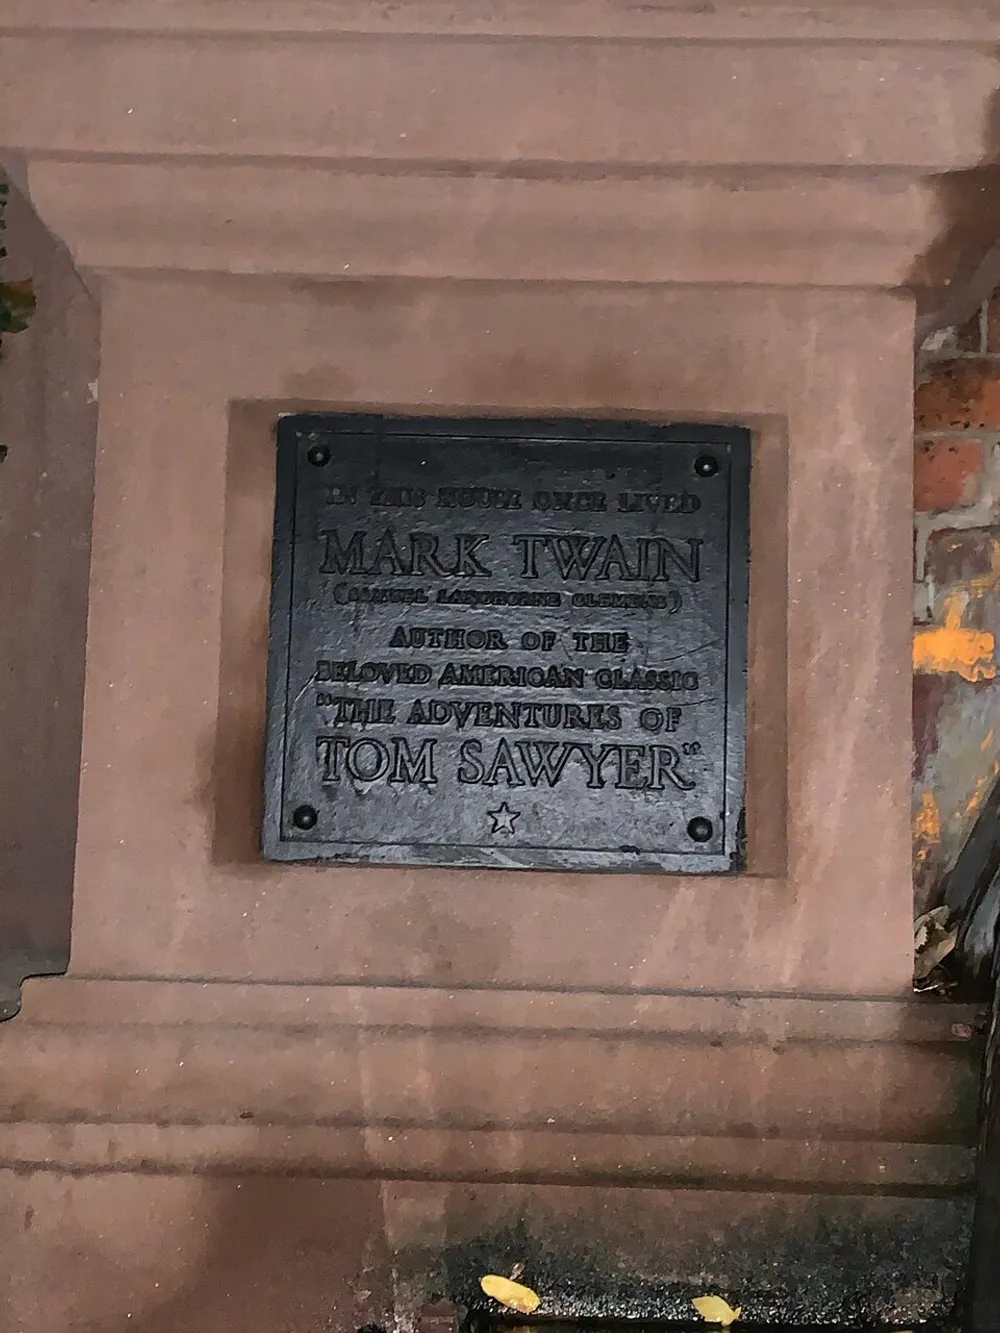 The image shows a commemorative plaque honoring Mark Twain the author of the beloved American classics The Adventures of Tom Sawyer and others affixed to a stone wall or structure